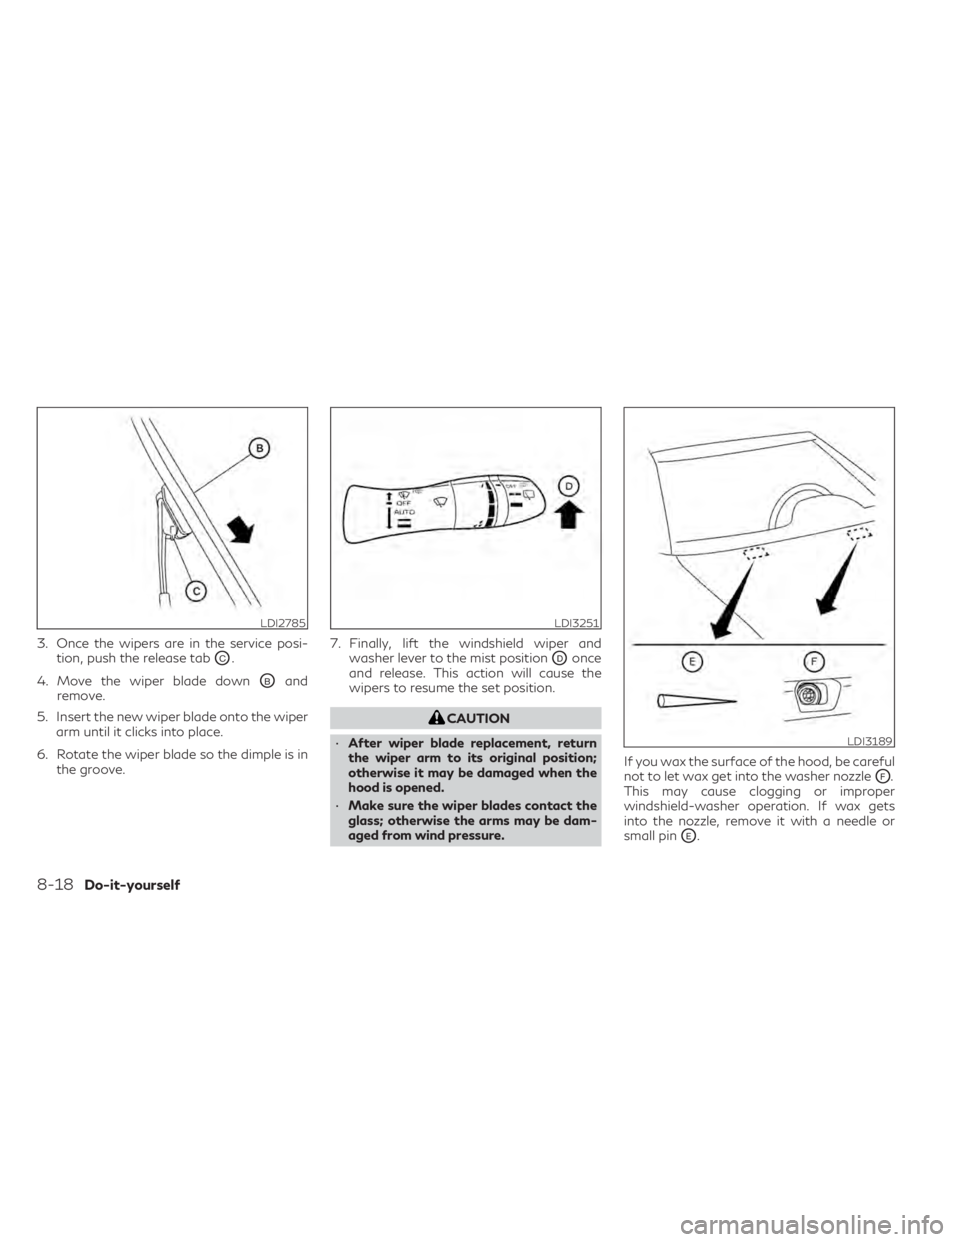 INFINITI QX50 2021  Owners Manual 3. Once the wipers are in the service posi-tion, push the release tab
OC.
4. Move the wiper blade down
OBand
remove.
5. Insert the new wiper blade onto the wiper arm until it clicks into place.
6. Rot